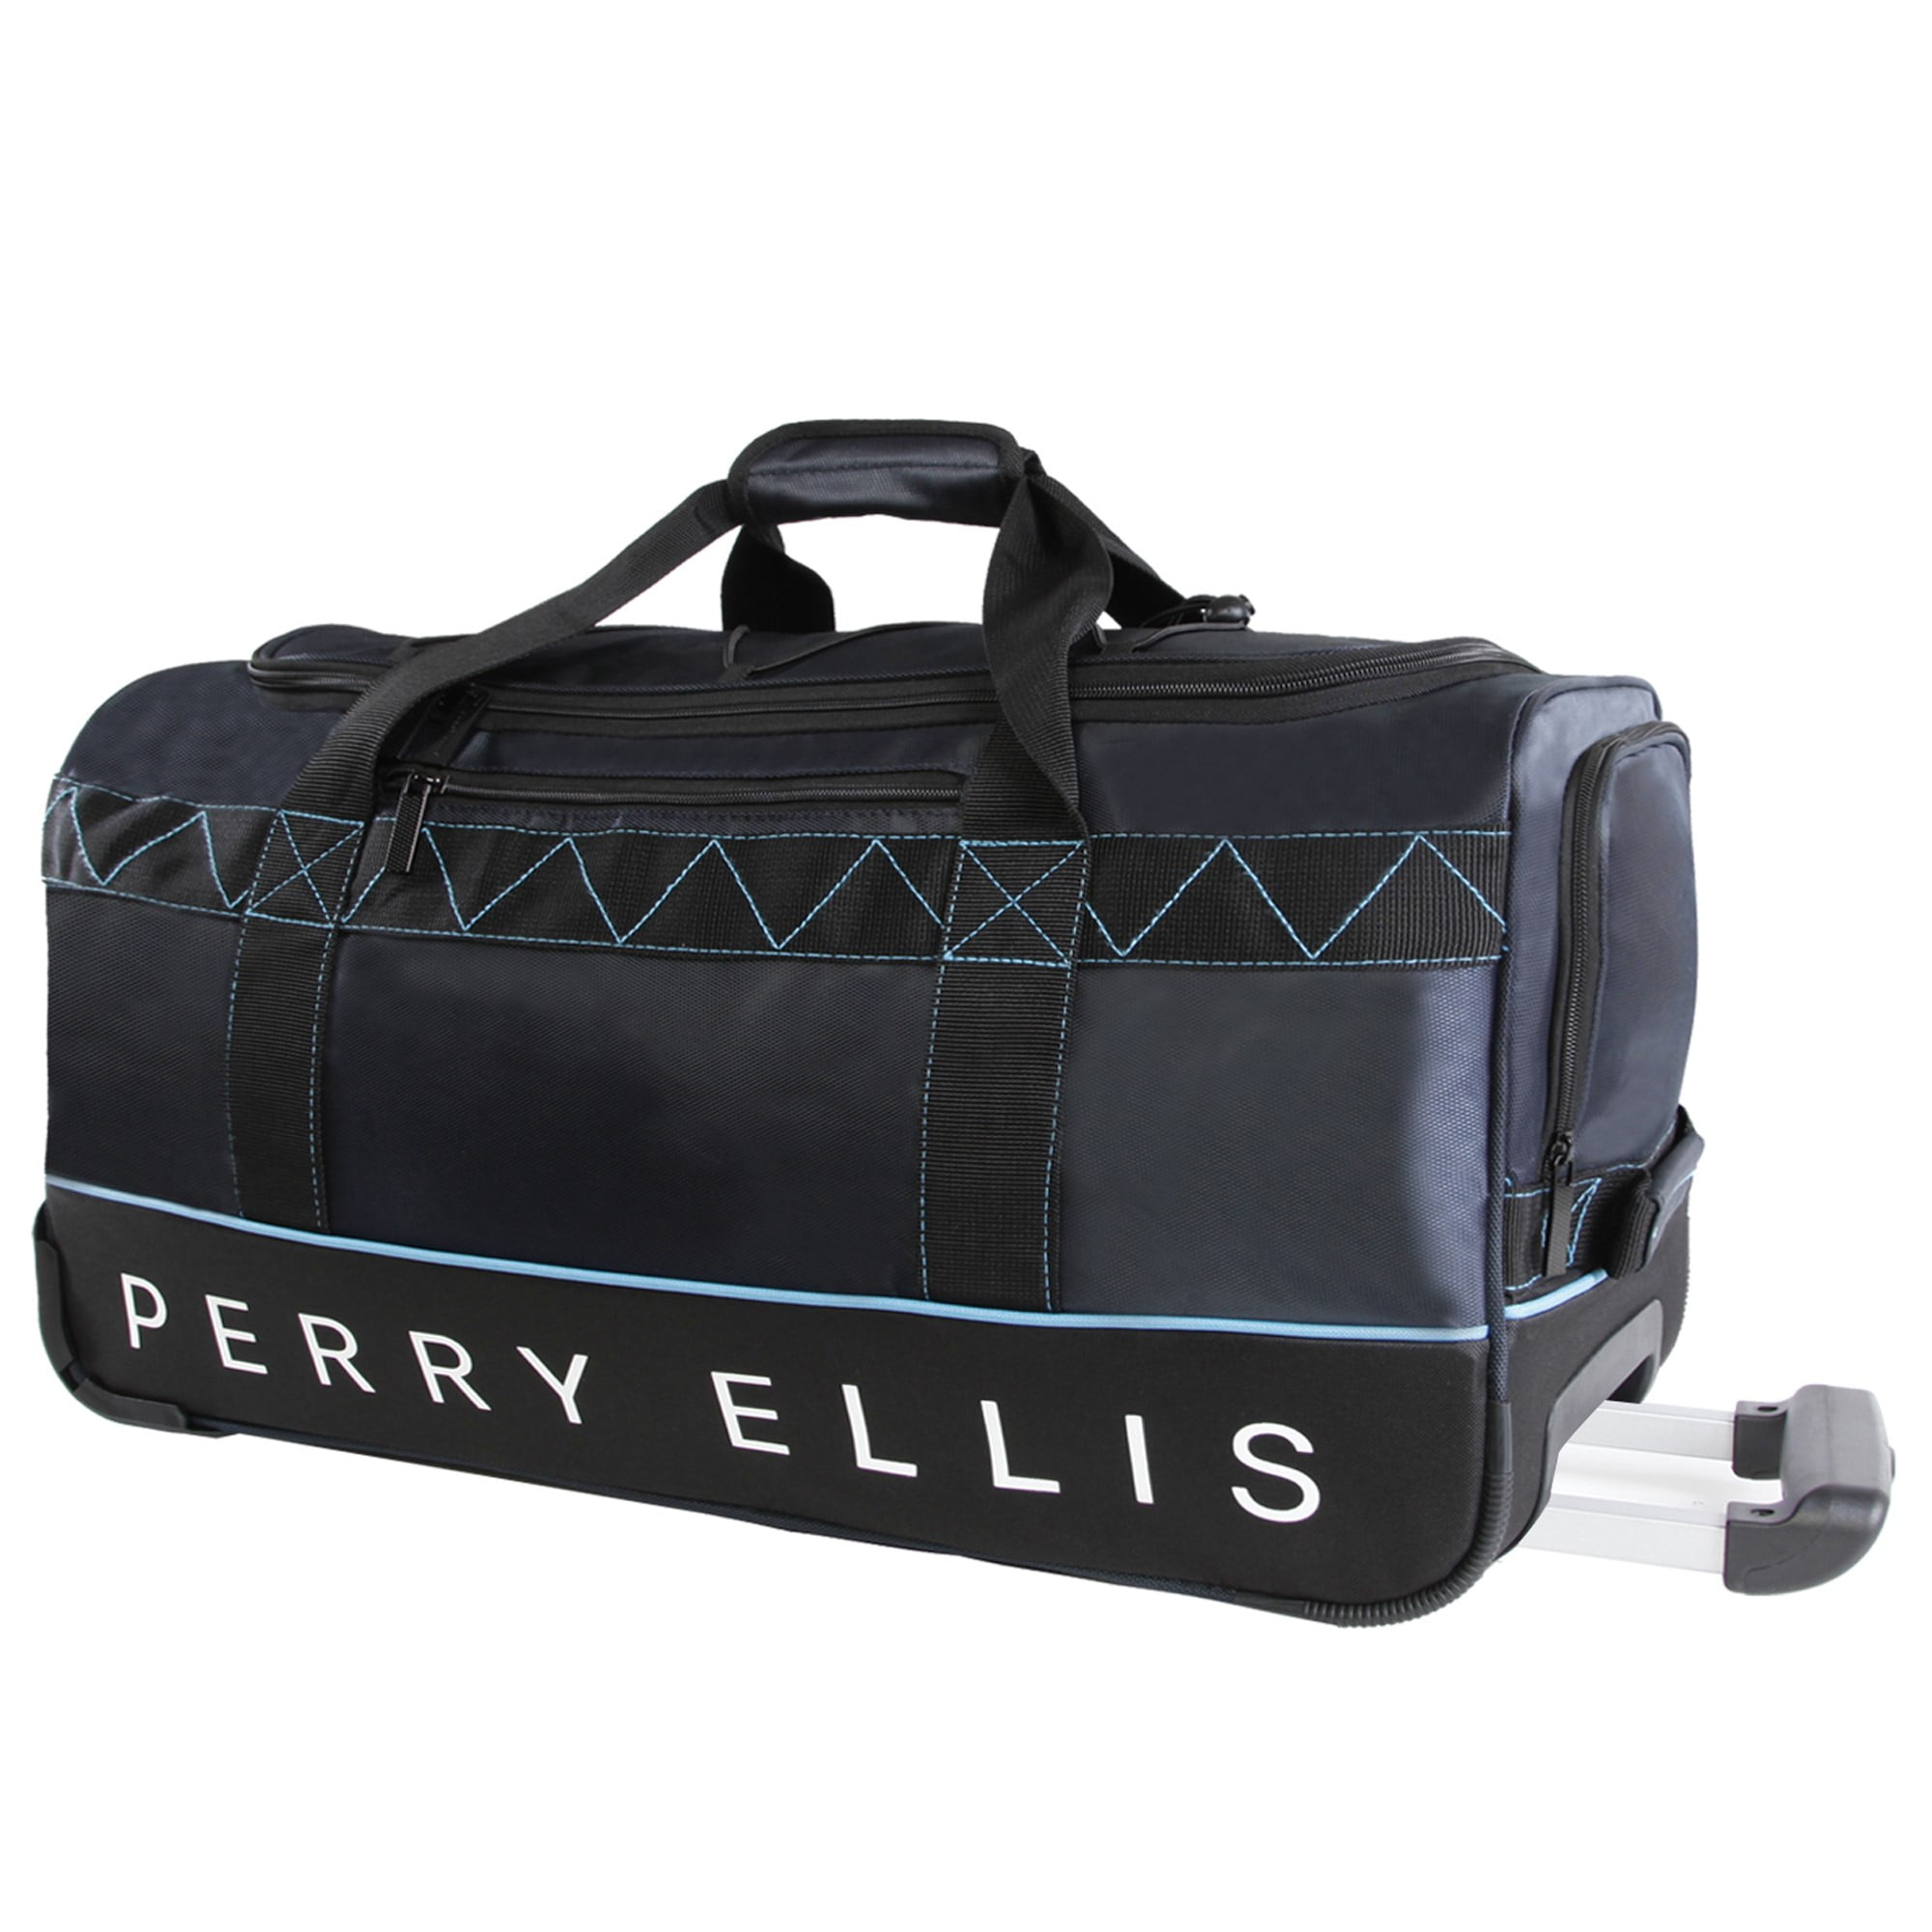 Perry Ellis Mens Extra Large 35 Rolling Bag-A335 Duffel Bag Black/Grey One Size